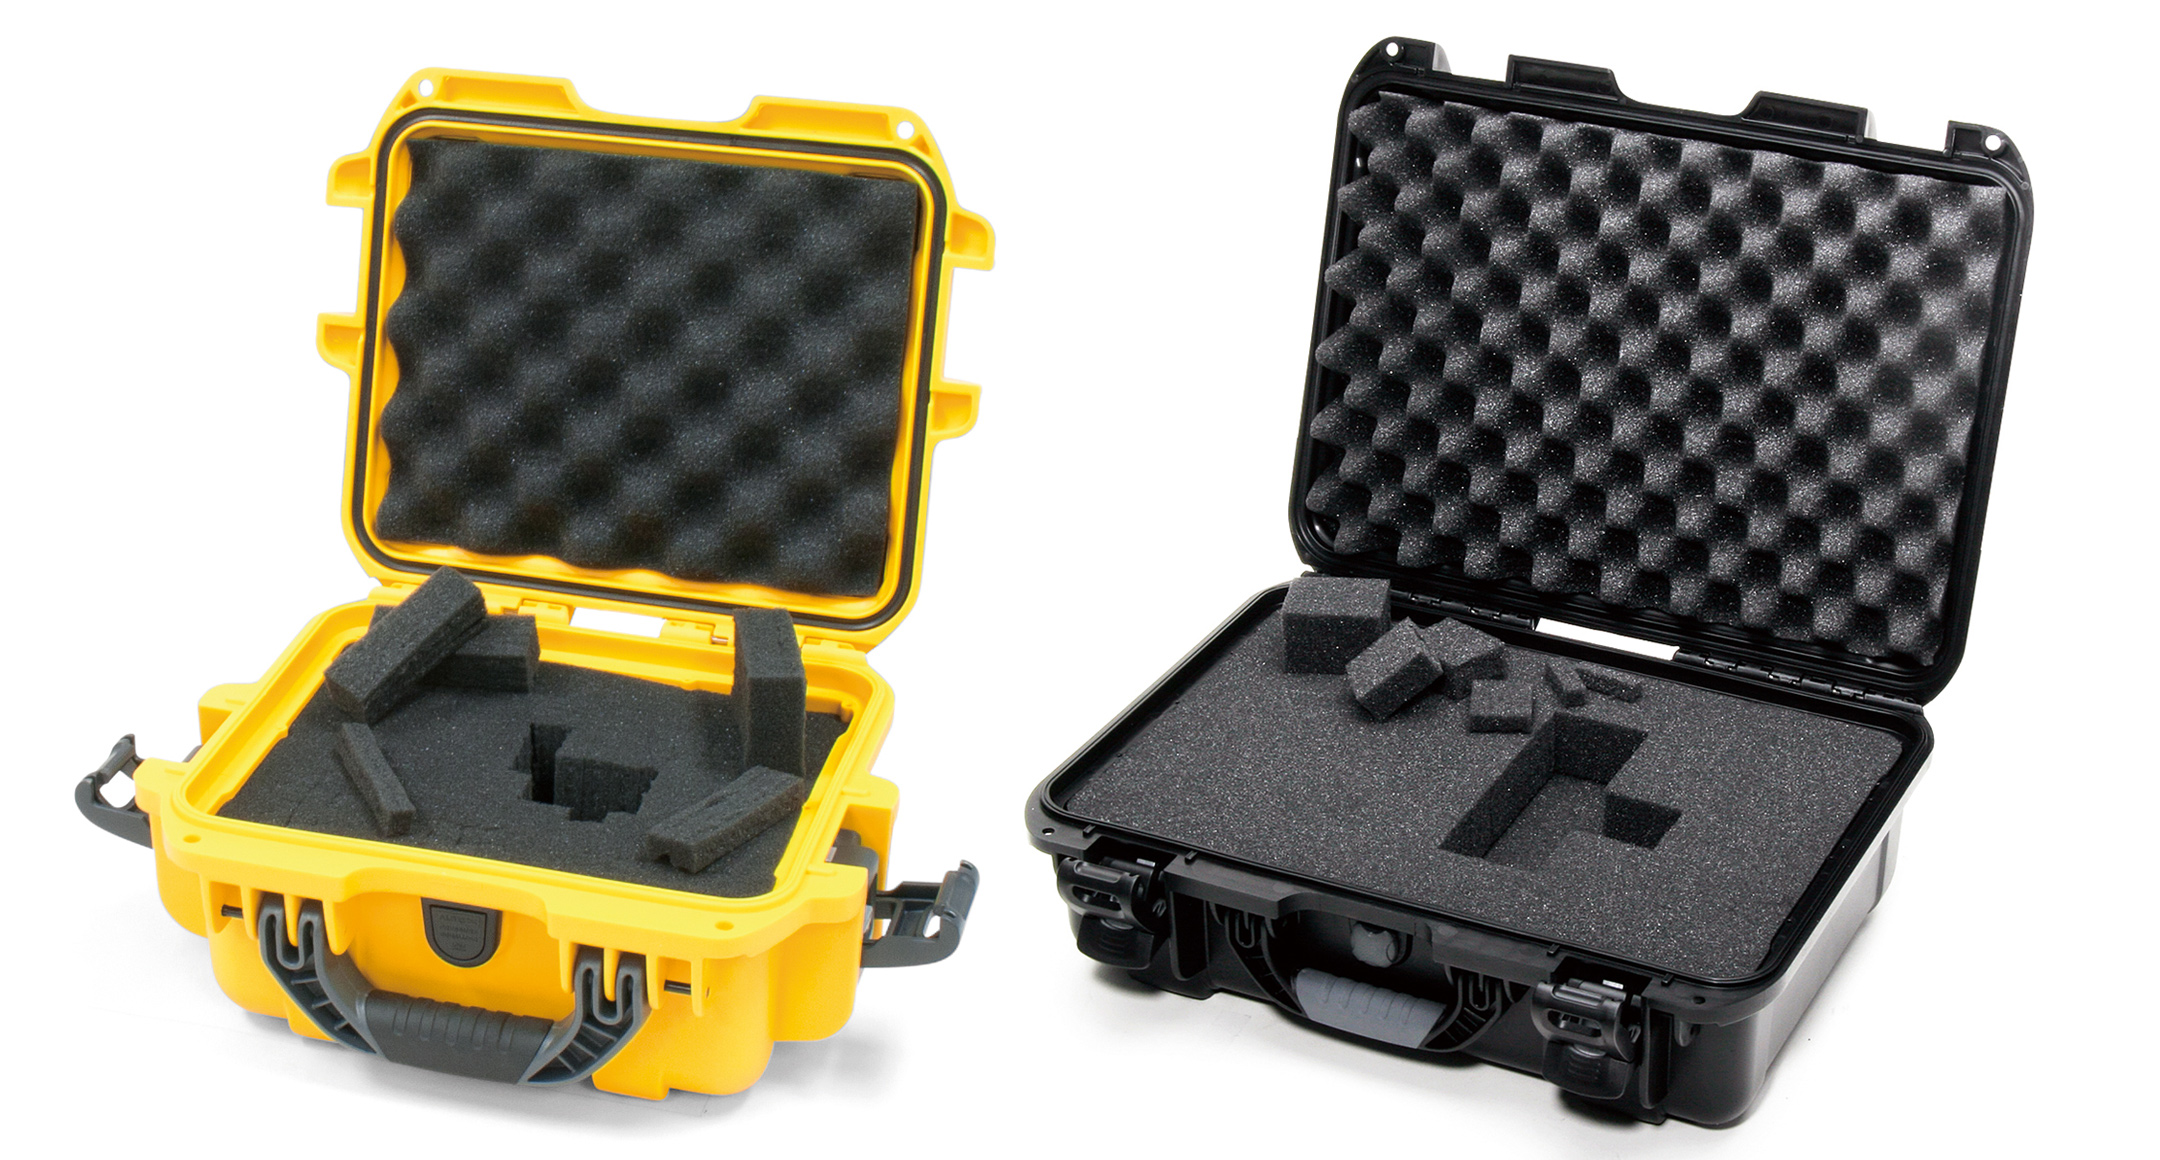 PROTECTOR CASE with KEY LOCK - NKK series